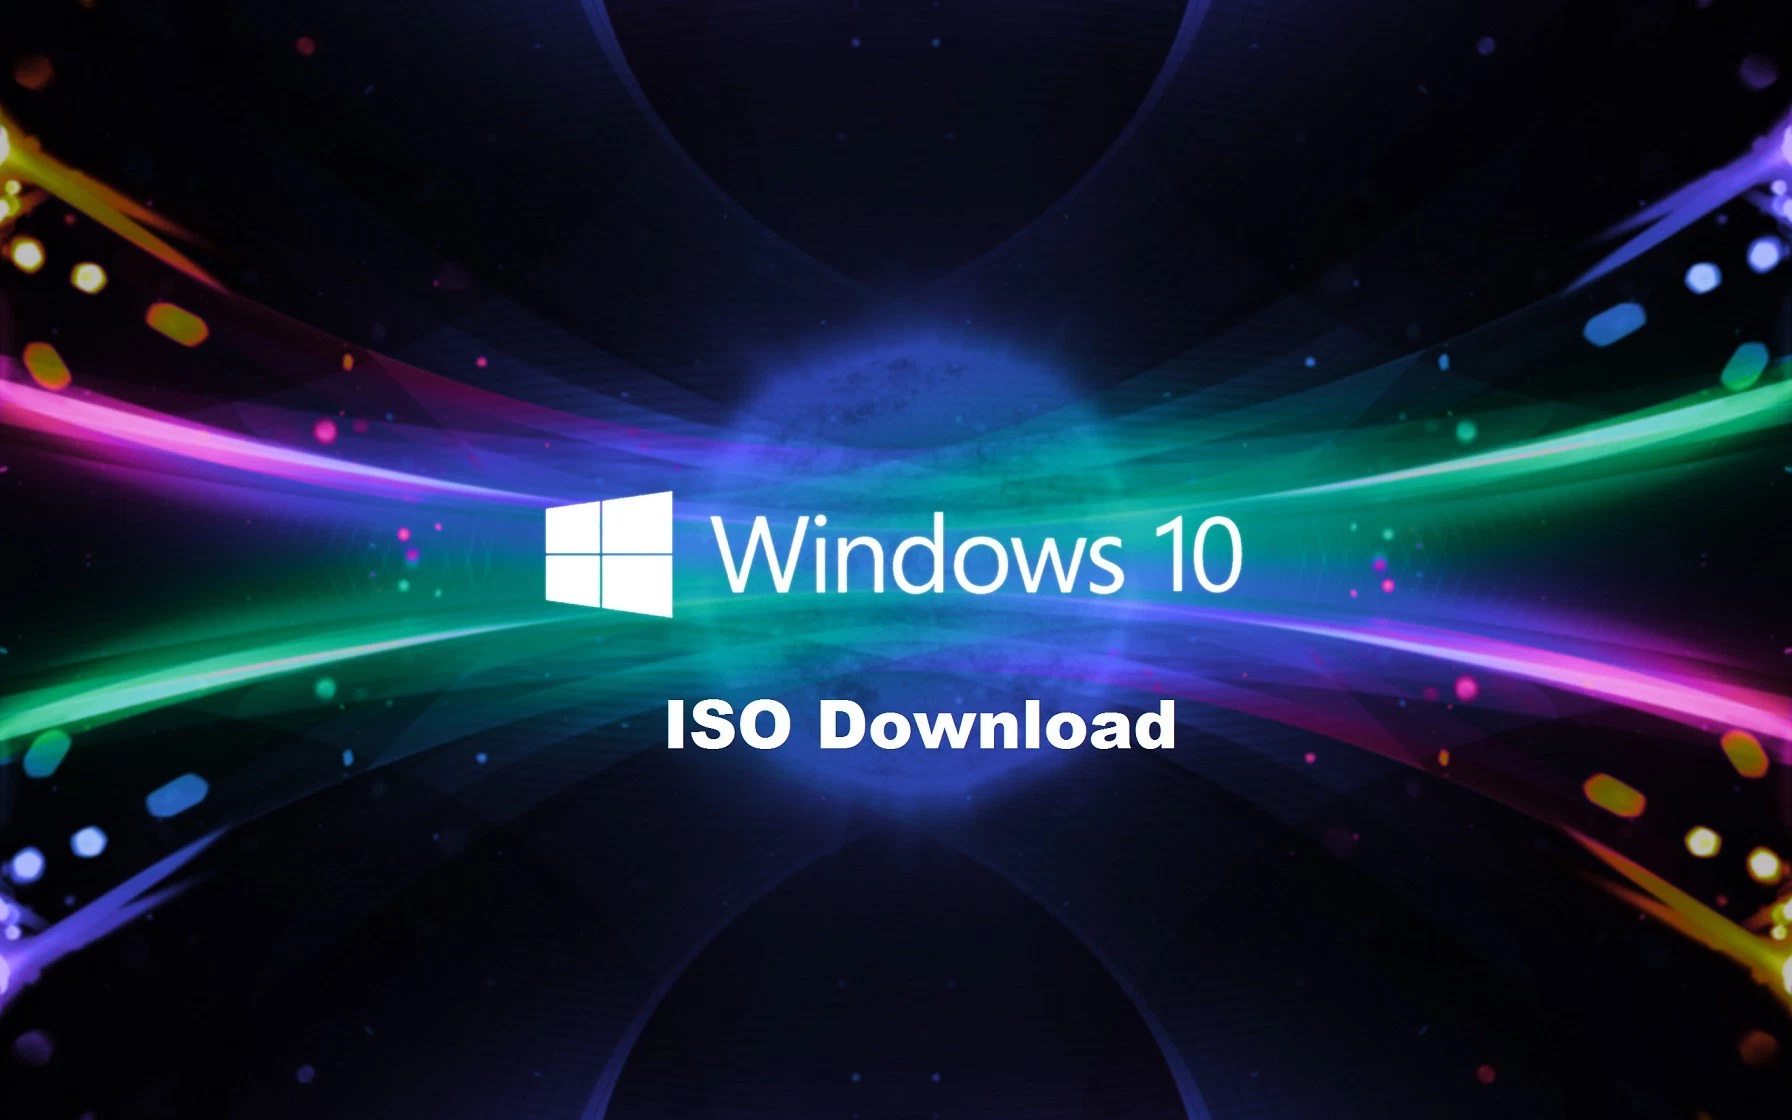 download windows 10.iso